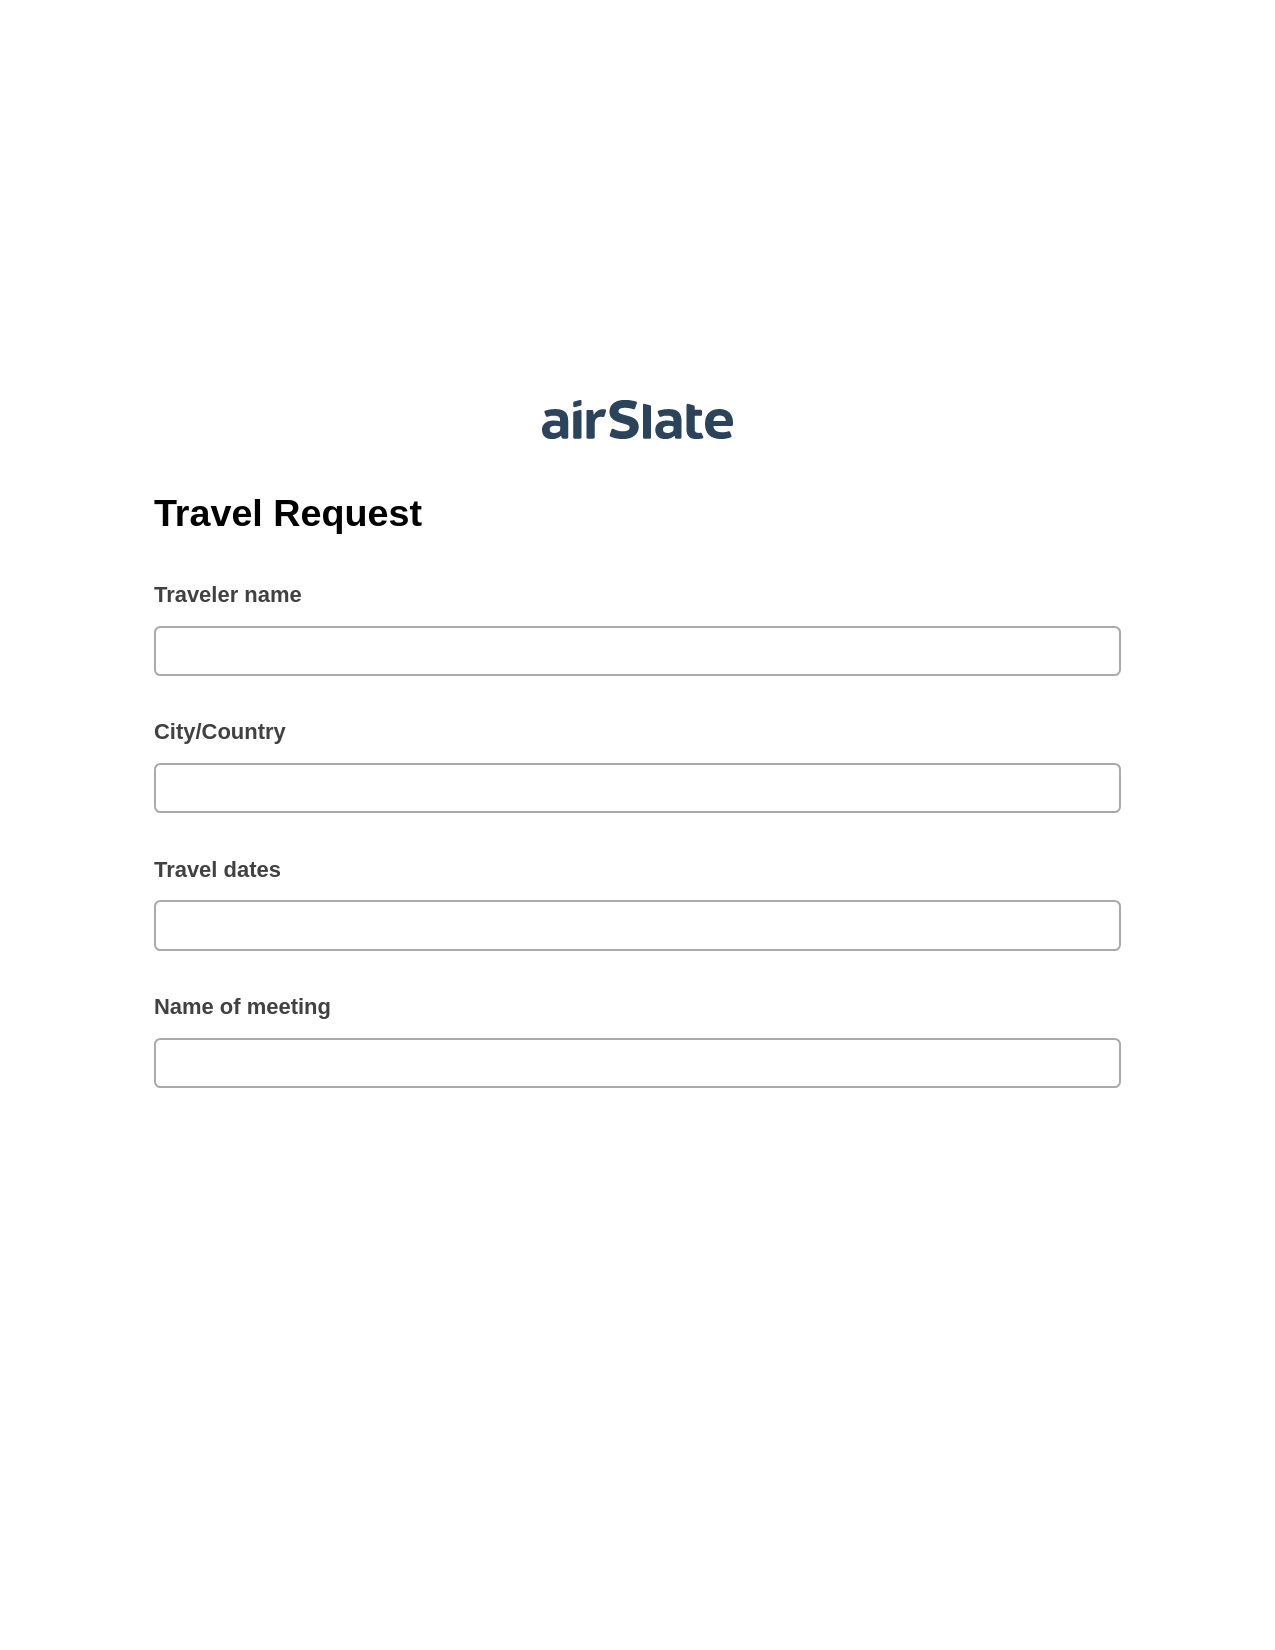 Travel Request Pre-fill from Salesforce Record Bot, Roles Reminder Bot, Export to Smartsheet